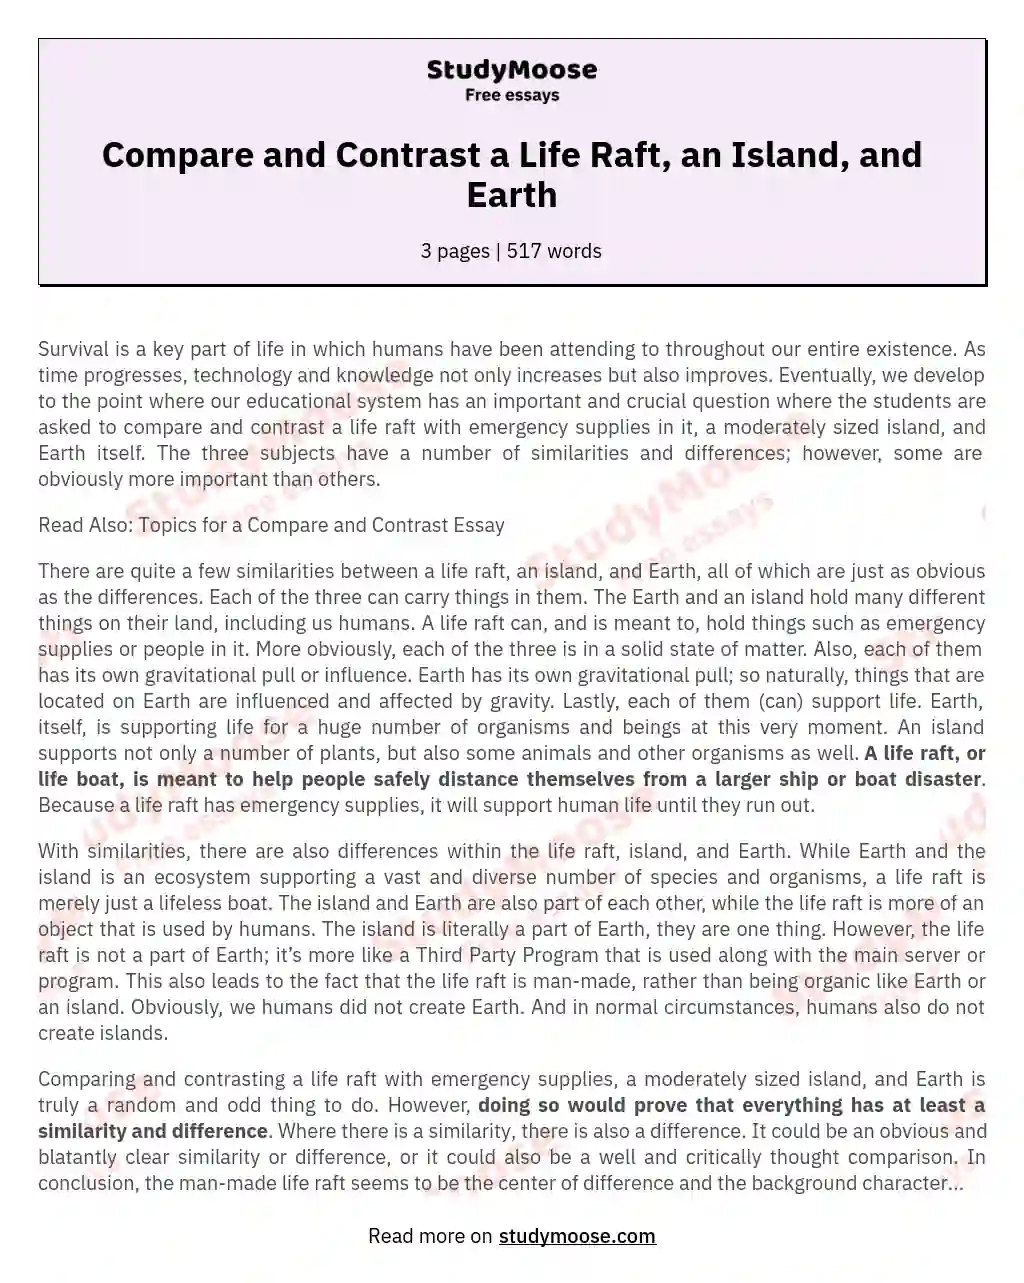 Compare and Contrast a Life Raft, an Island, and Earth